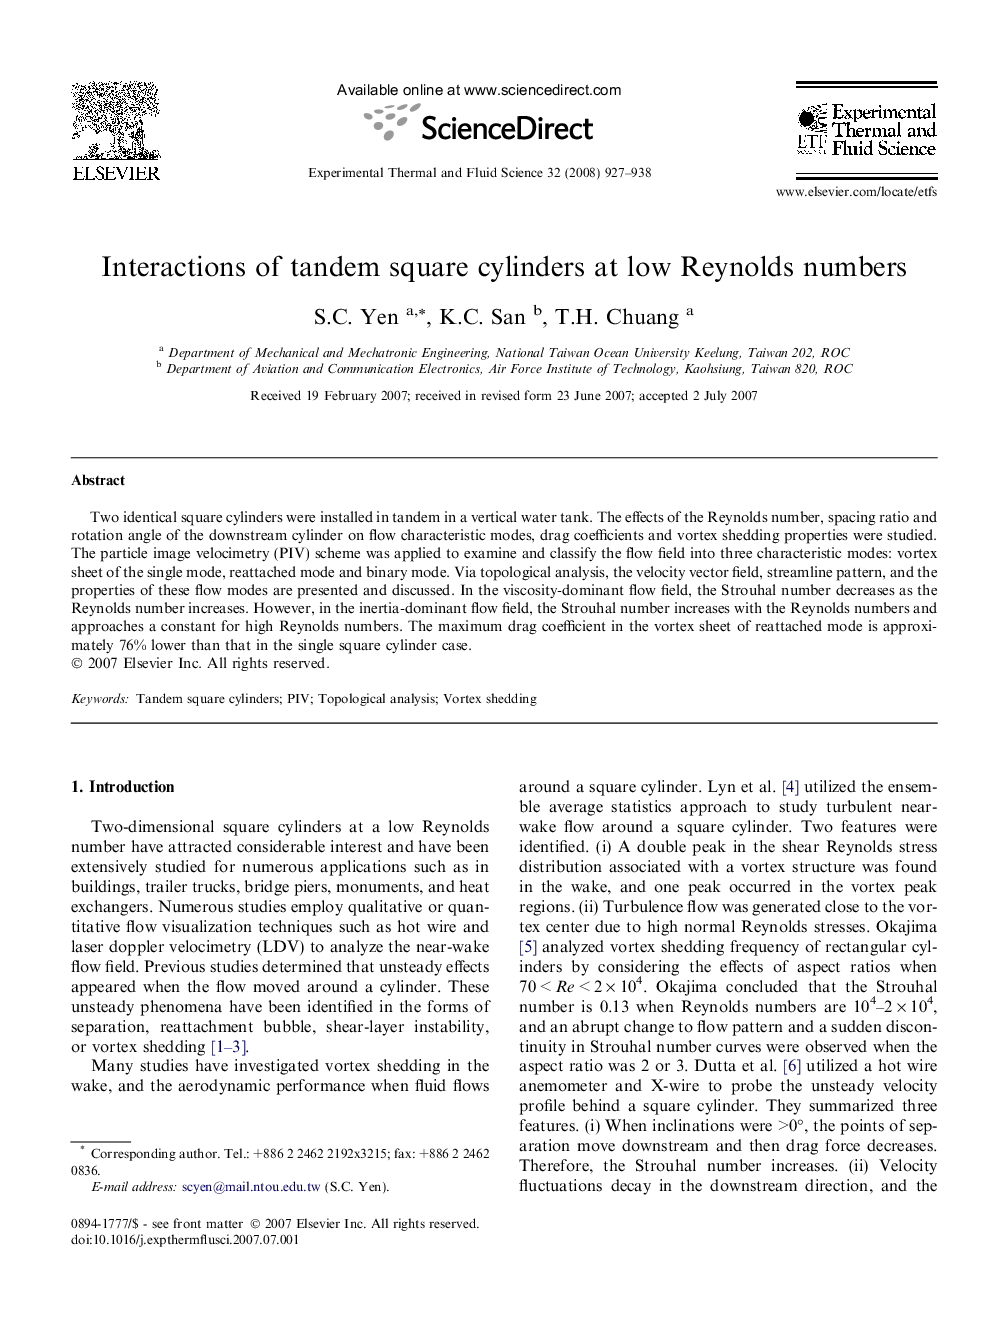 Interactions of tandem square cylinders at low Reynolds numbers